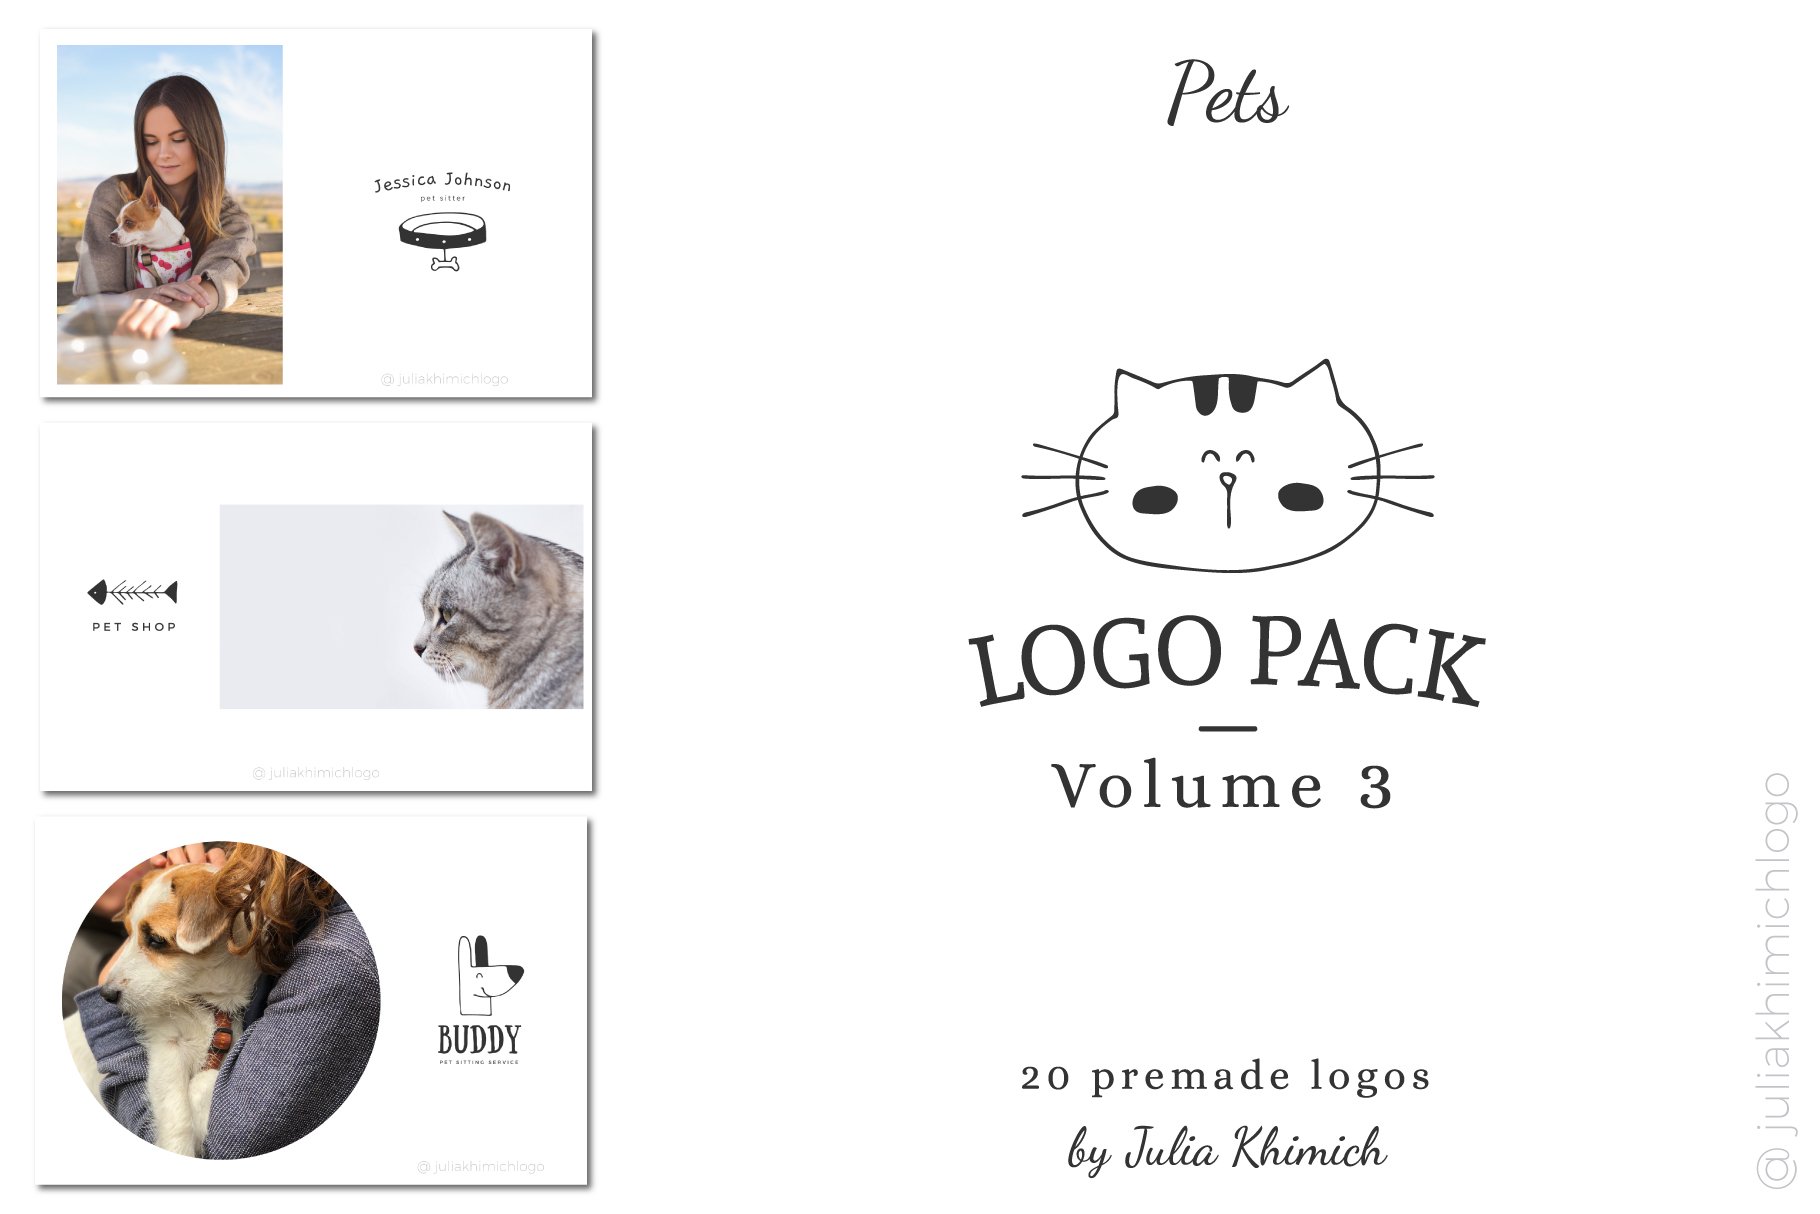 Logo Pack Vol.3. Pets cover image.